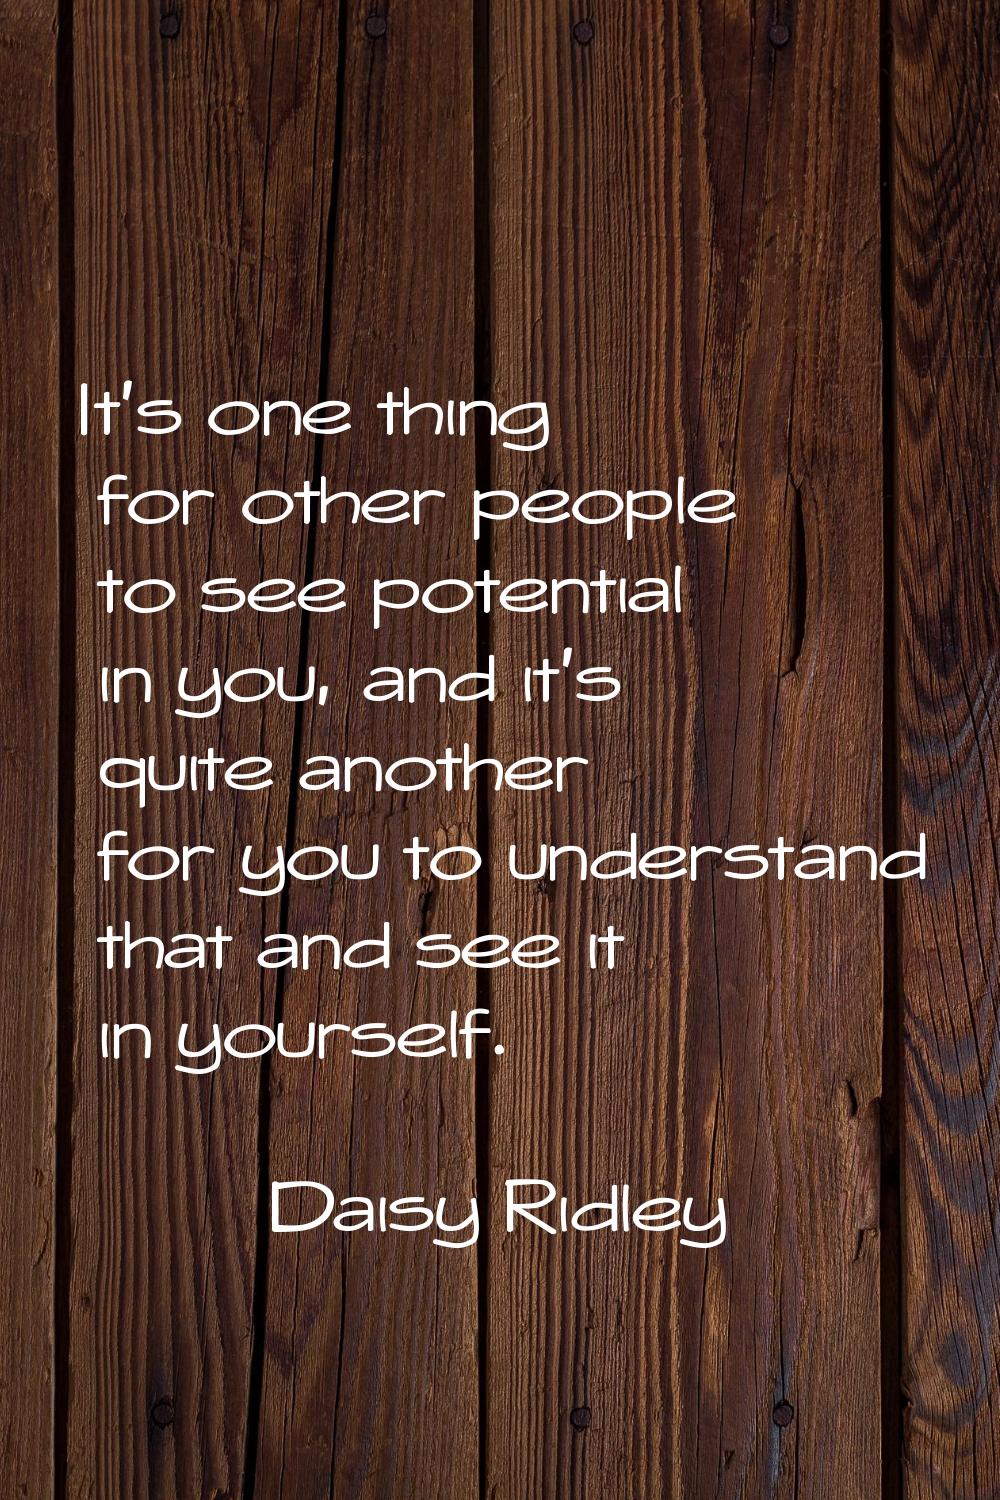 It's one thing for other people to see potential in you, and it's quite another for you to understa